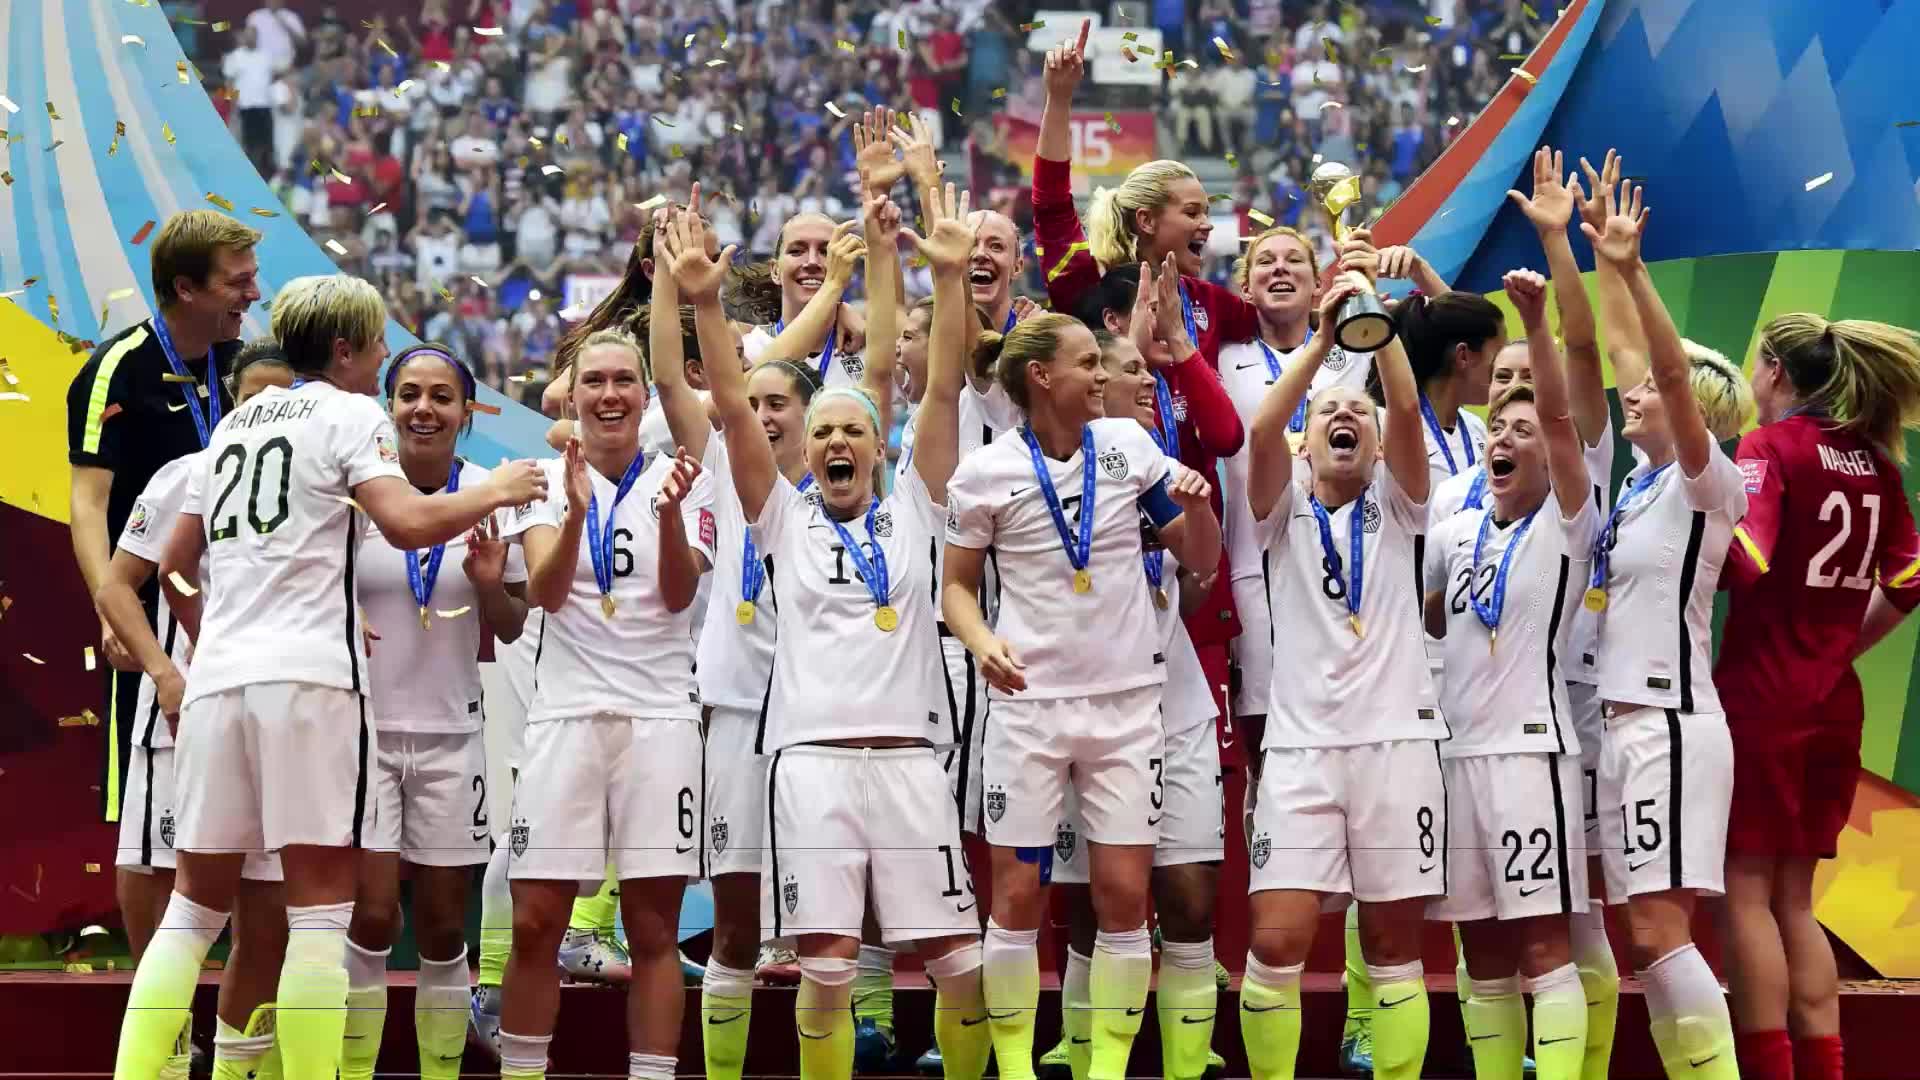 Don't watch soccer? Here are some 2019 Women's World Cup basics